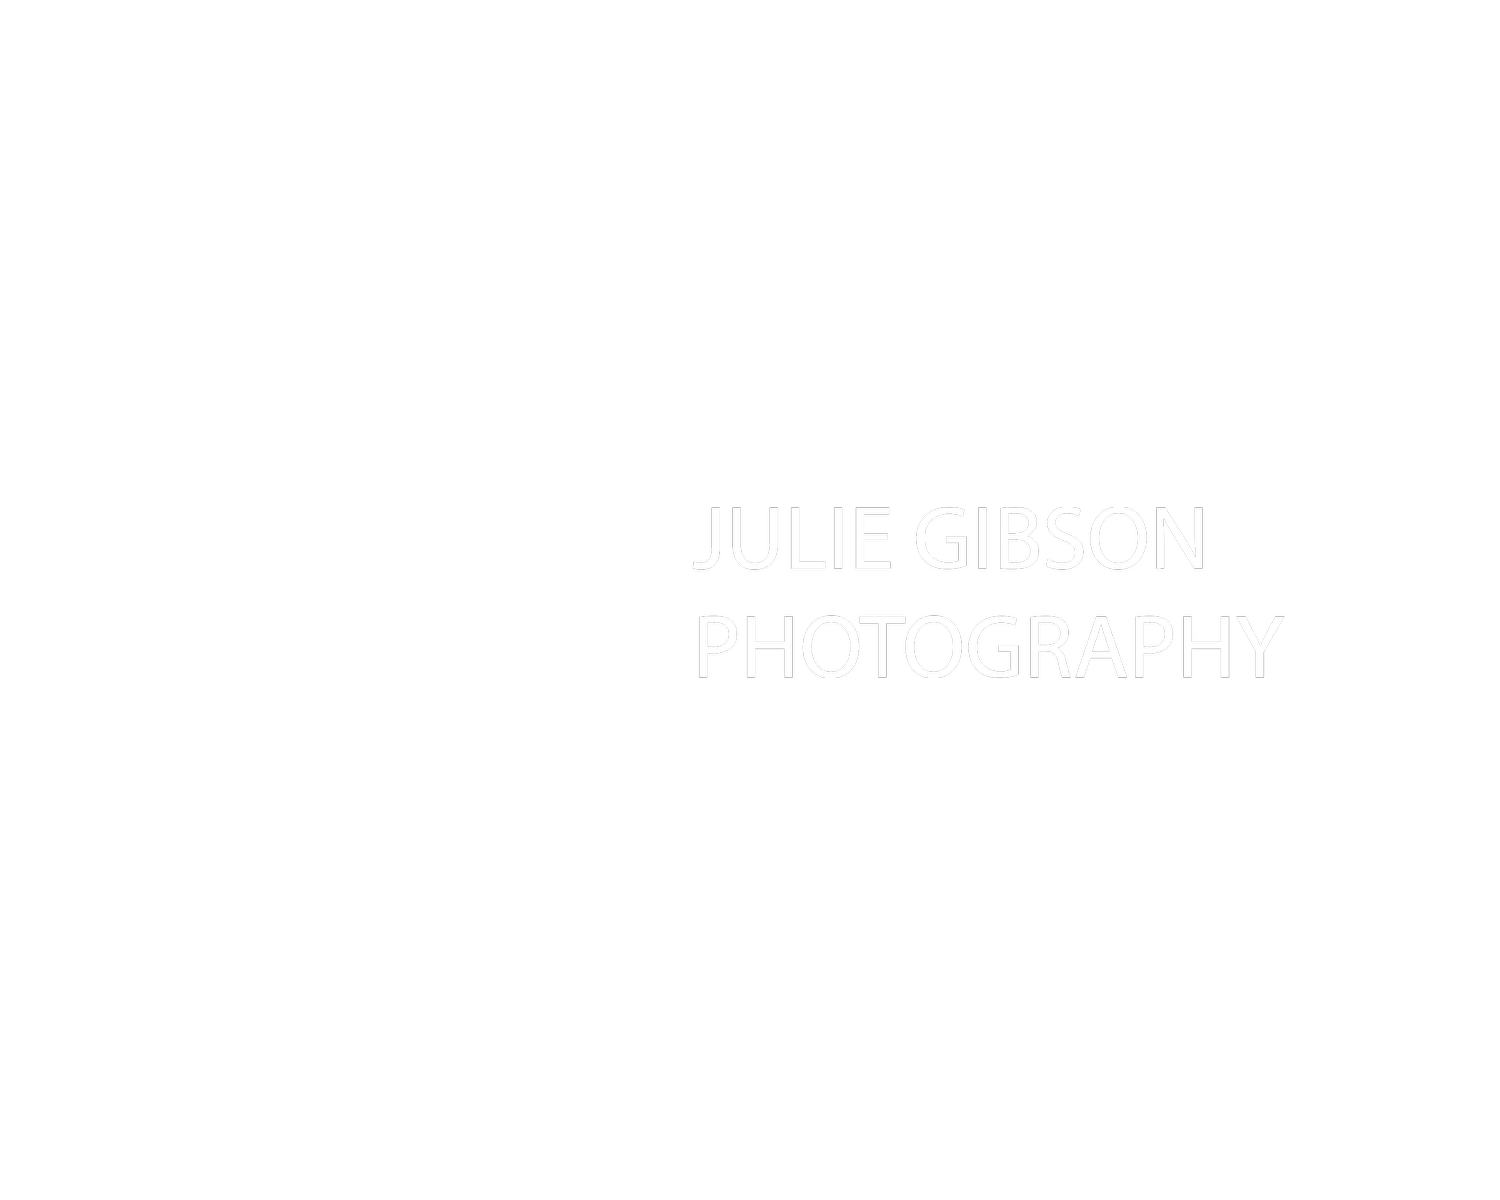 Julie Gibson Photography